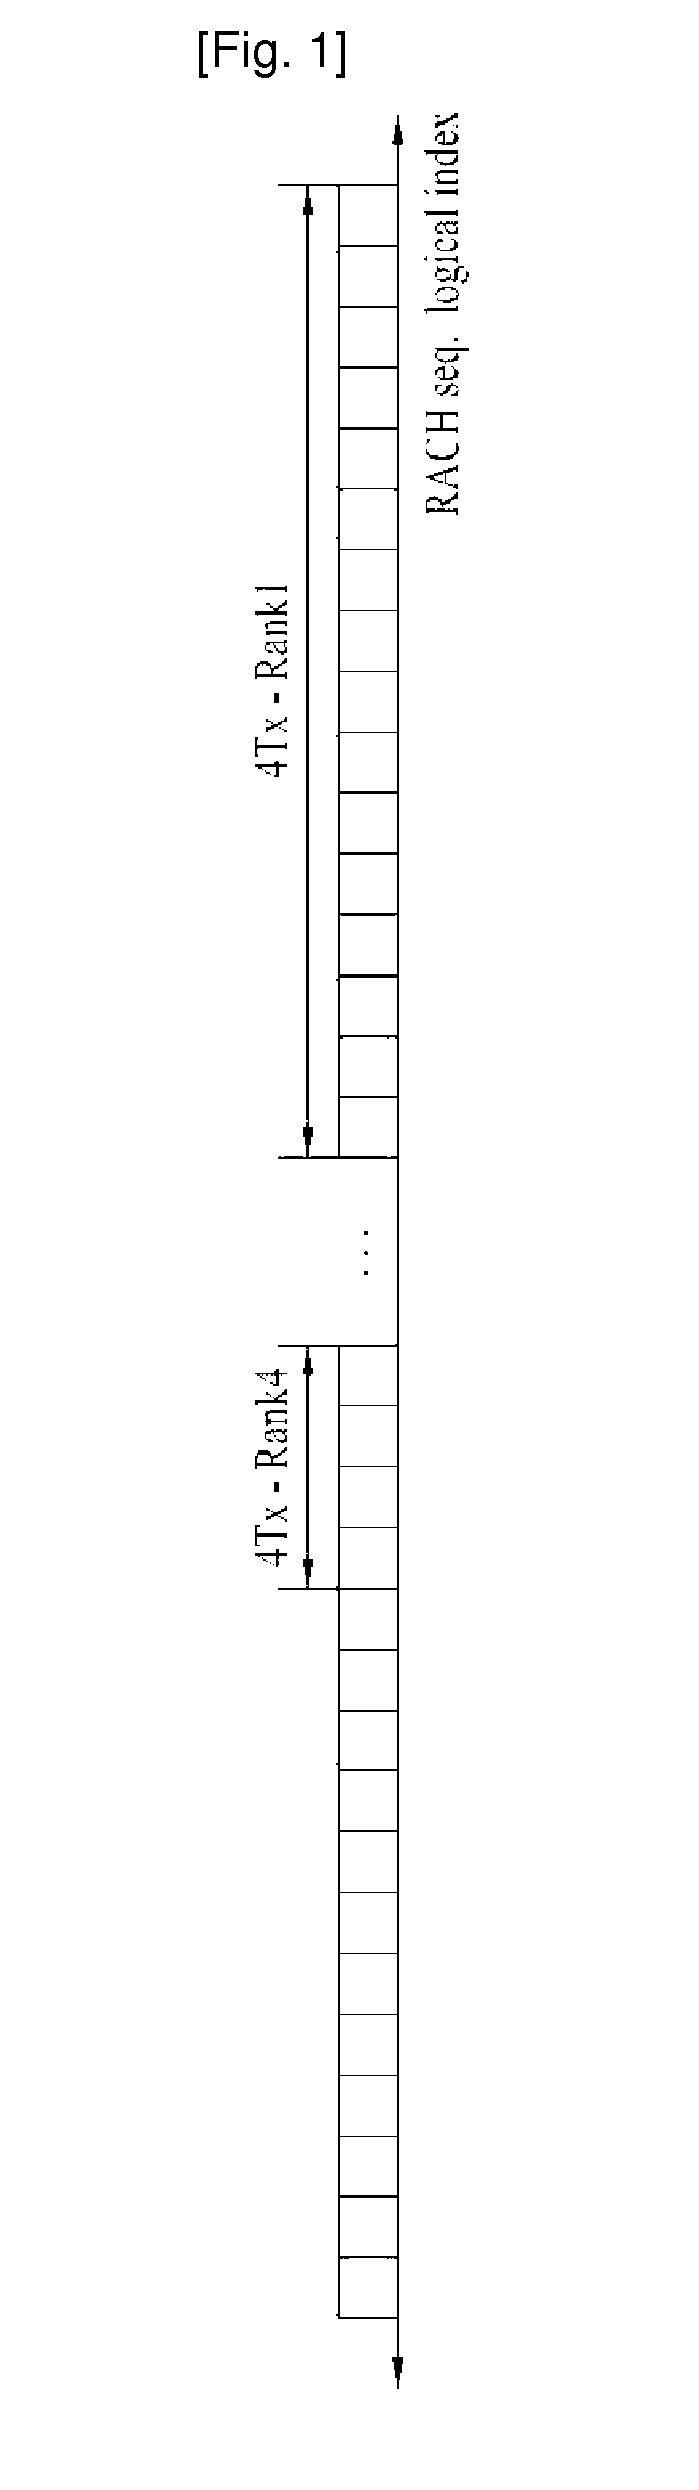 Method of Transmitting Signal in a Wireless System